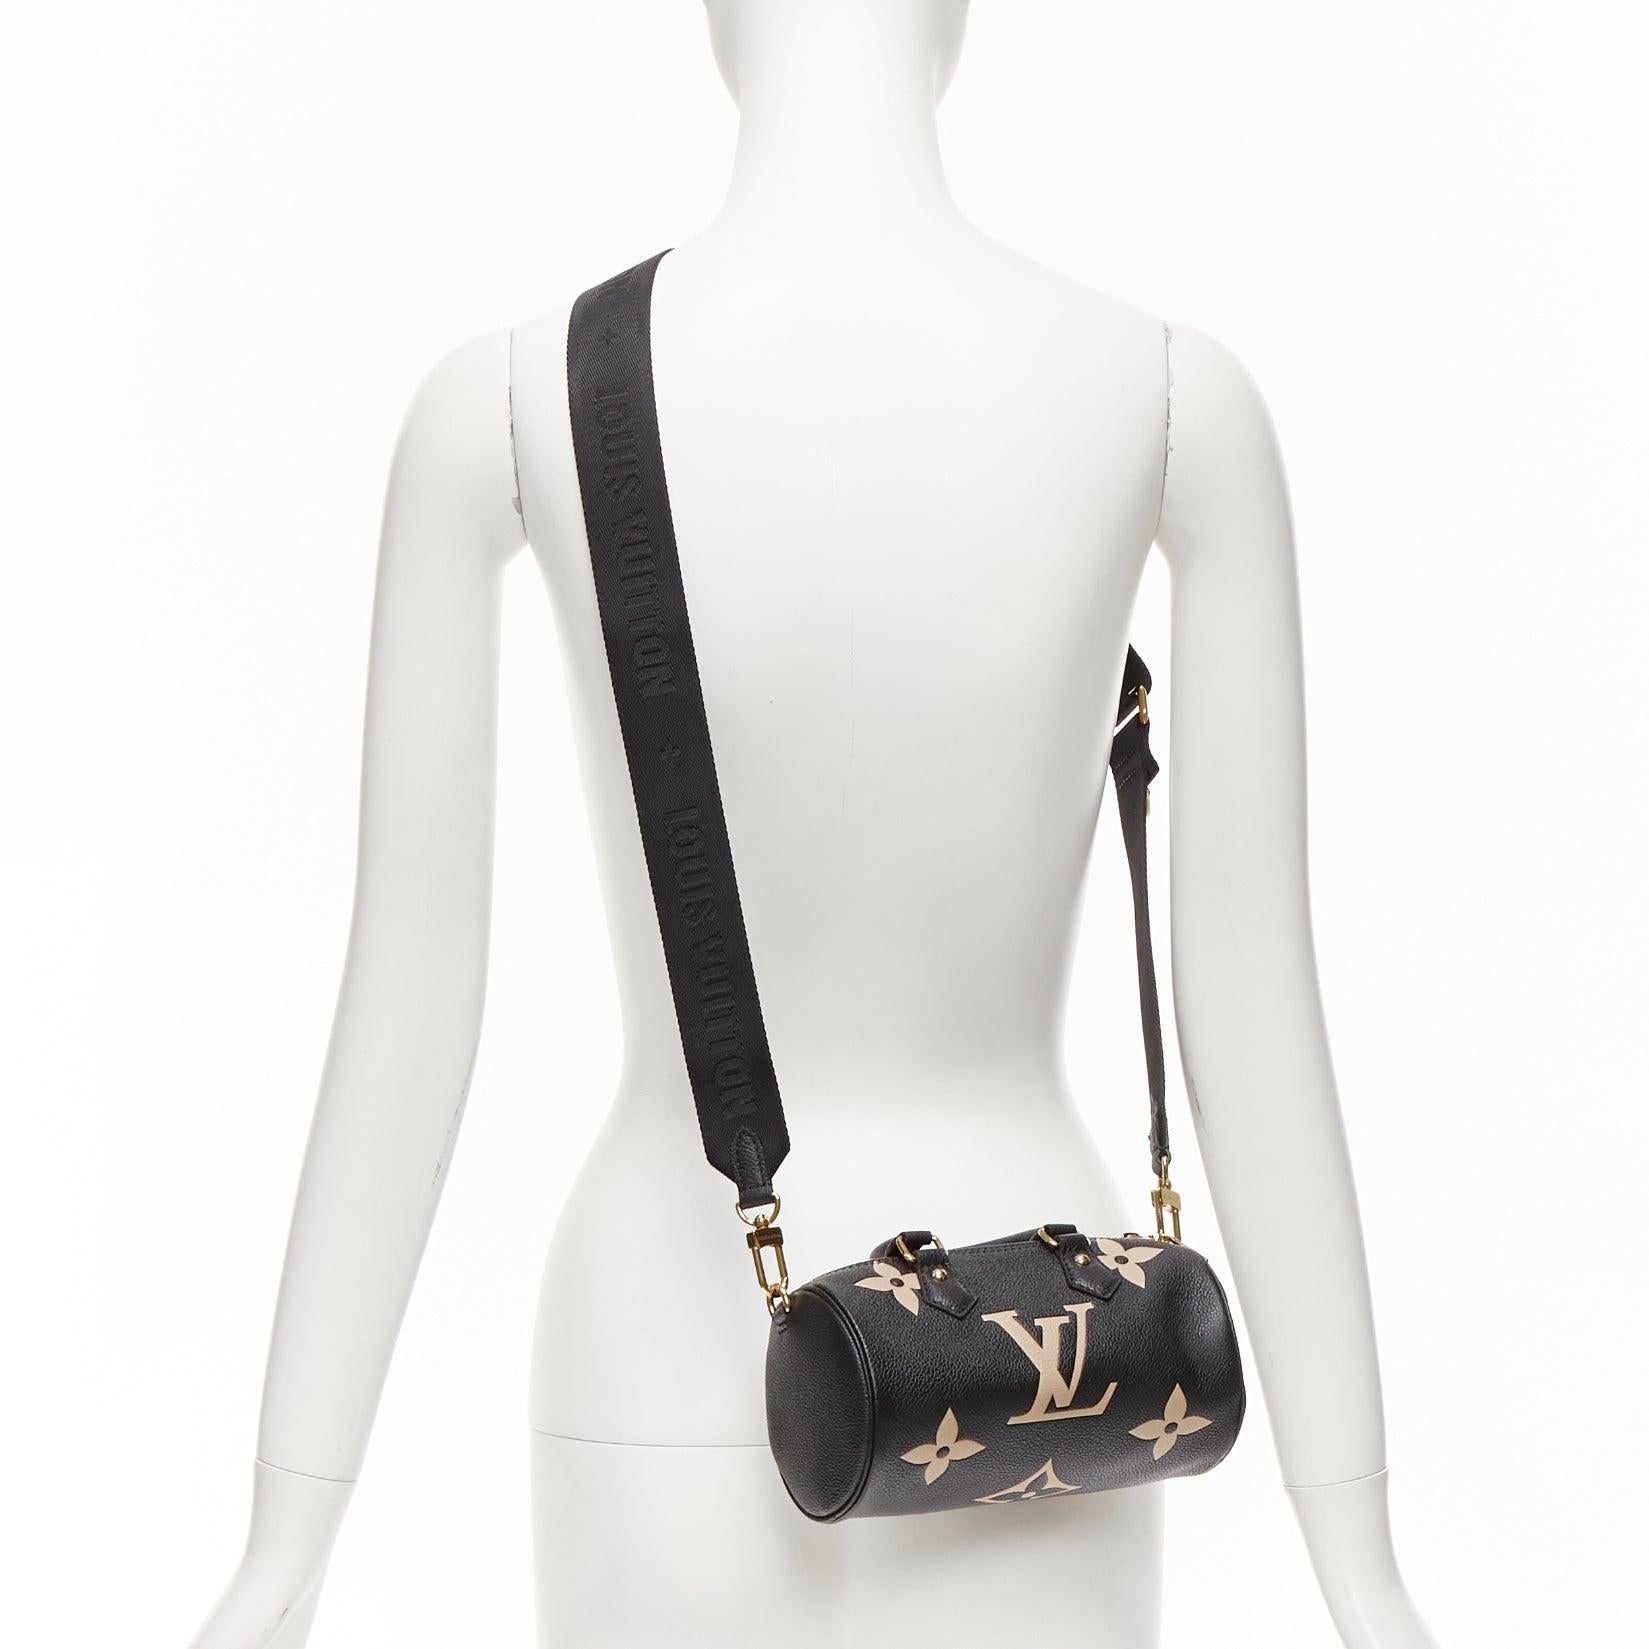 LOUIS VUITTON Papillon BB Giant Empreinte black nude small crossbody duffle bag
Reference: AAWC/A00946
Brand: Louis Vuitton
Model: Monogram Giant Empreinte Papillon BB
Material: Leather
Color: Black, Nude
Pattern: Monogram
Closure: Zip
Lining: Black